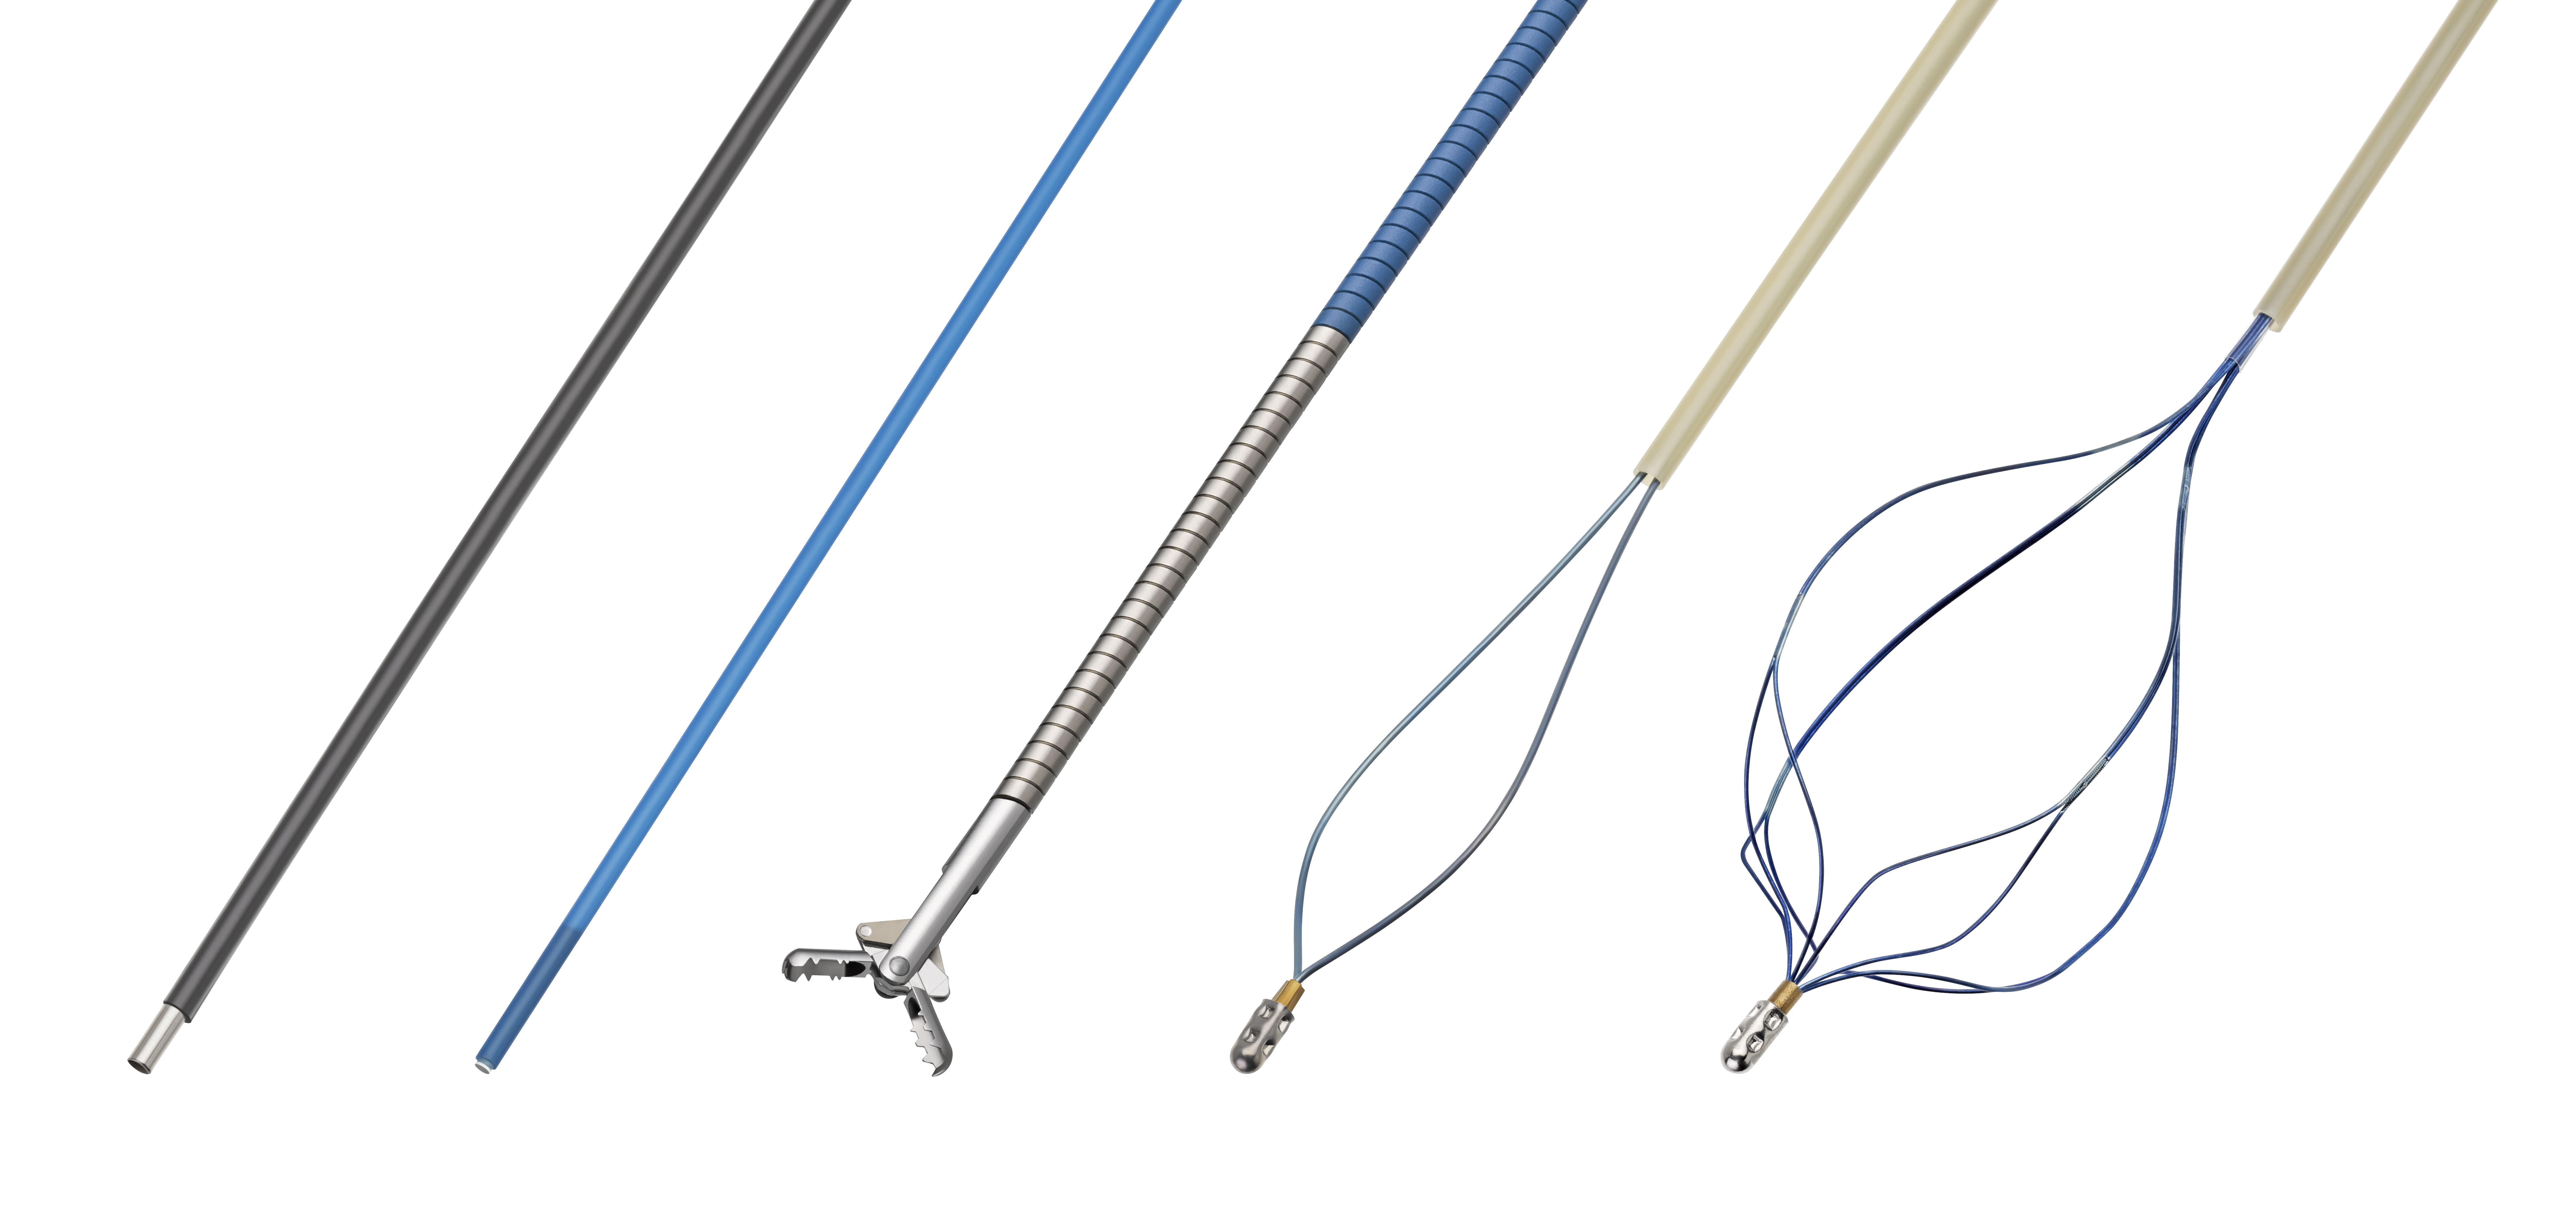 The SpyScope DS II Catheter is compatible with a full suite of diagnostic and therapeutic accessories.